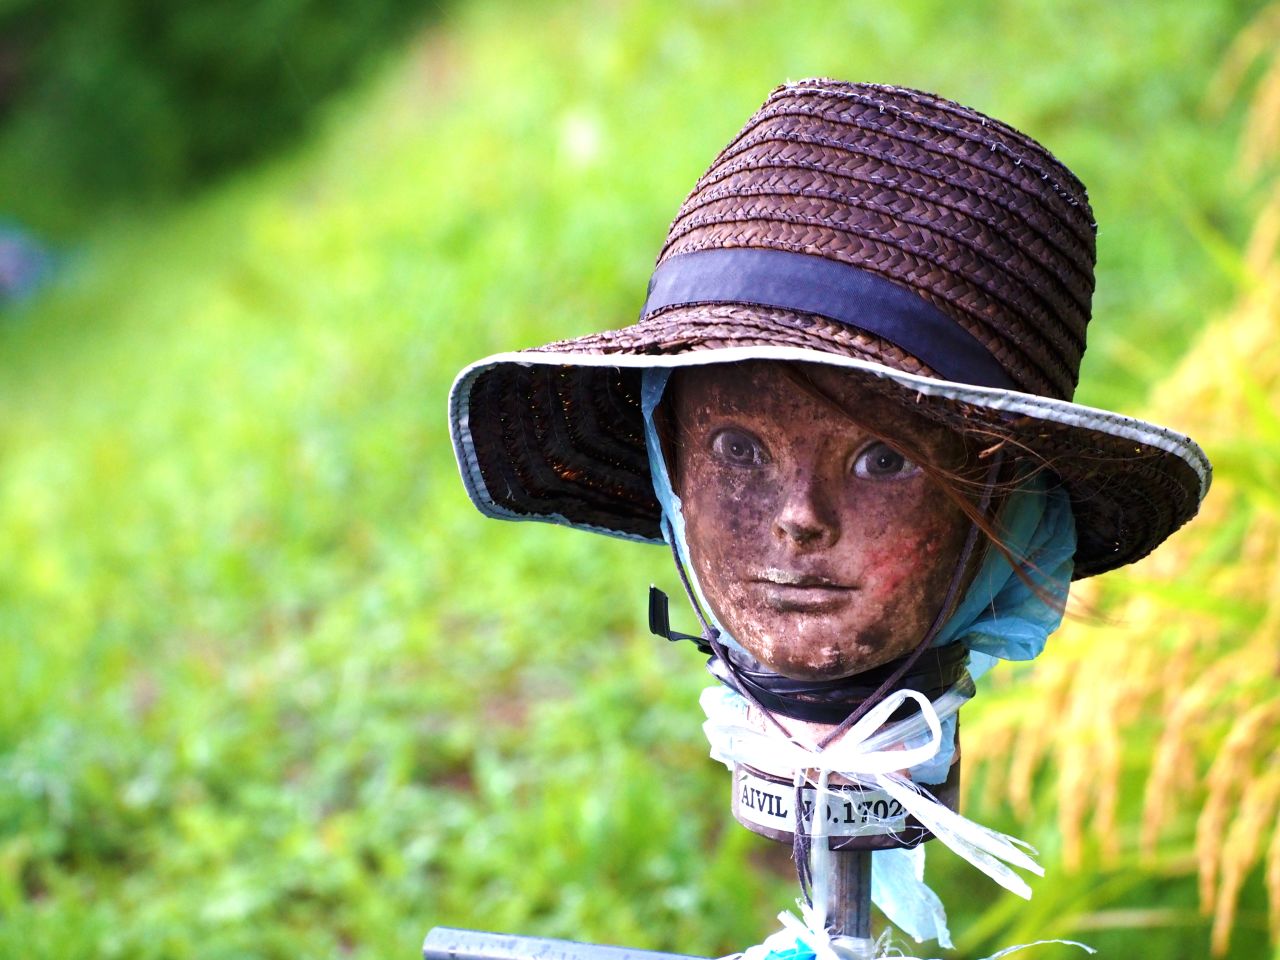 Photographer <a href="http://yourshot.nationalgeographic.com/profile/686001/" target="_blank" target="_blank">Dennis Doucet</a> was out searching for birds in the rice paddies near his neighborhood in Kobe, Japan, when he spotted a bunch of mannequin heads appearing in the fields. 